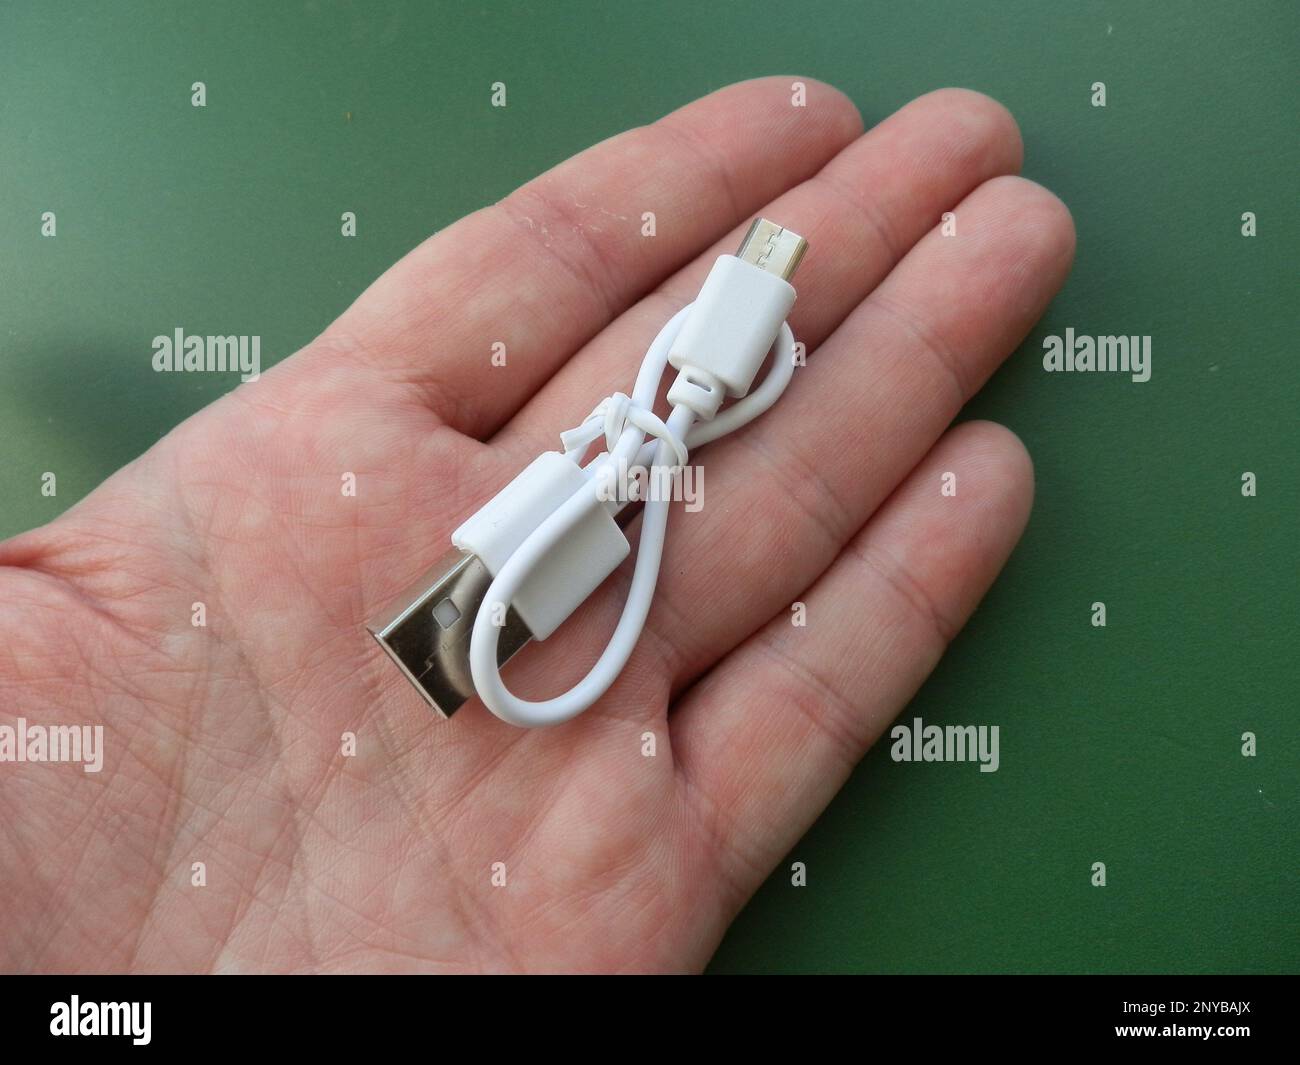 Accessory for smartphone and computer in the hand. Stock Photo